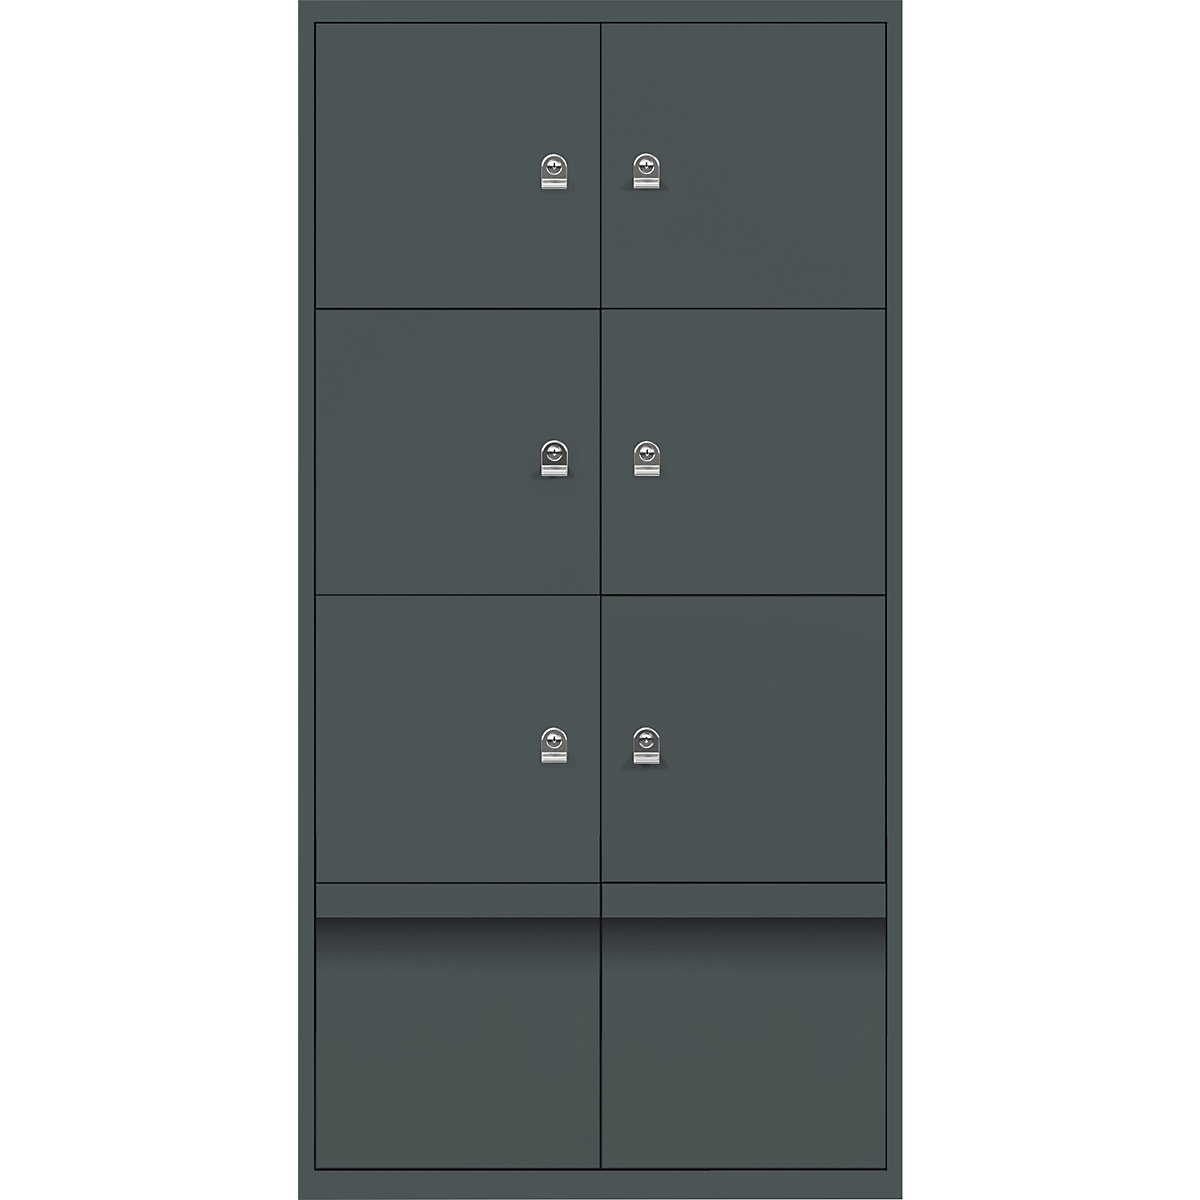 BISLEY – LateralFile™ lodge, with 6 lockable compartments and 2 drawers, height 375 mm each, slate